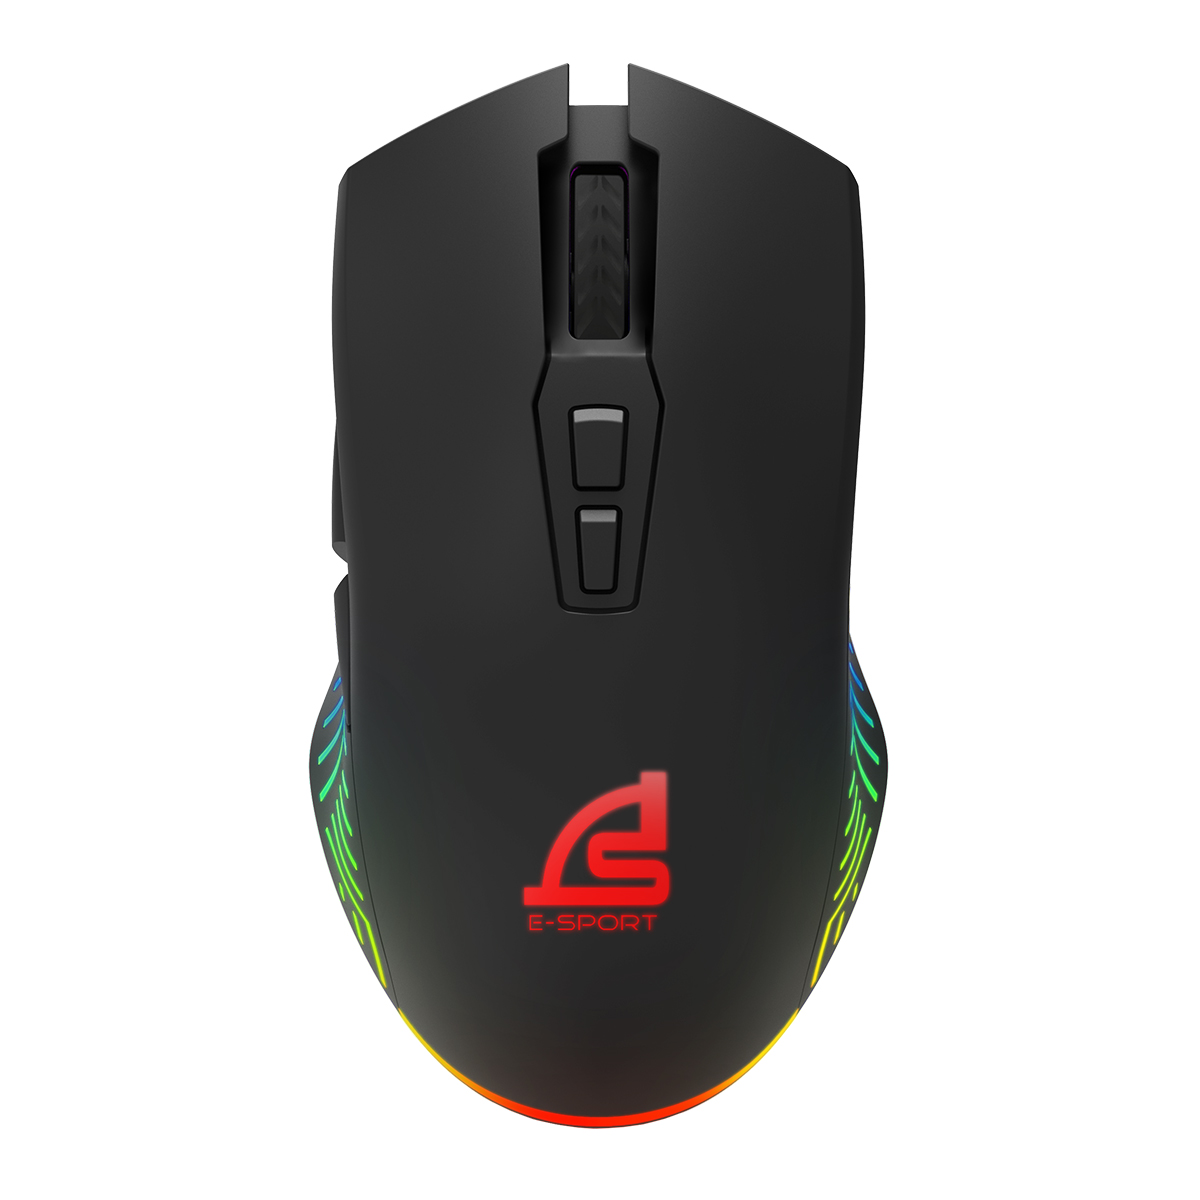 SIGNO Gaming Mouse (Black) GM-951